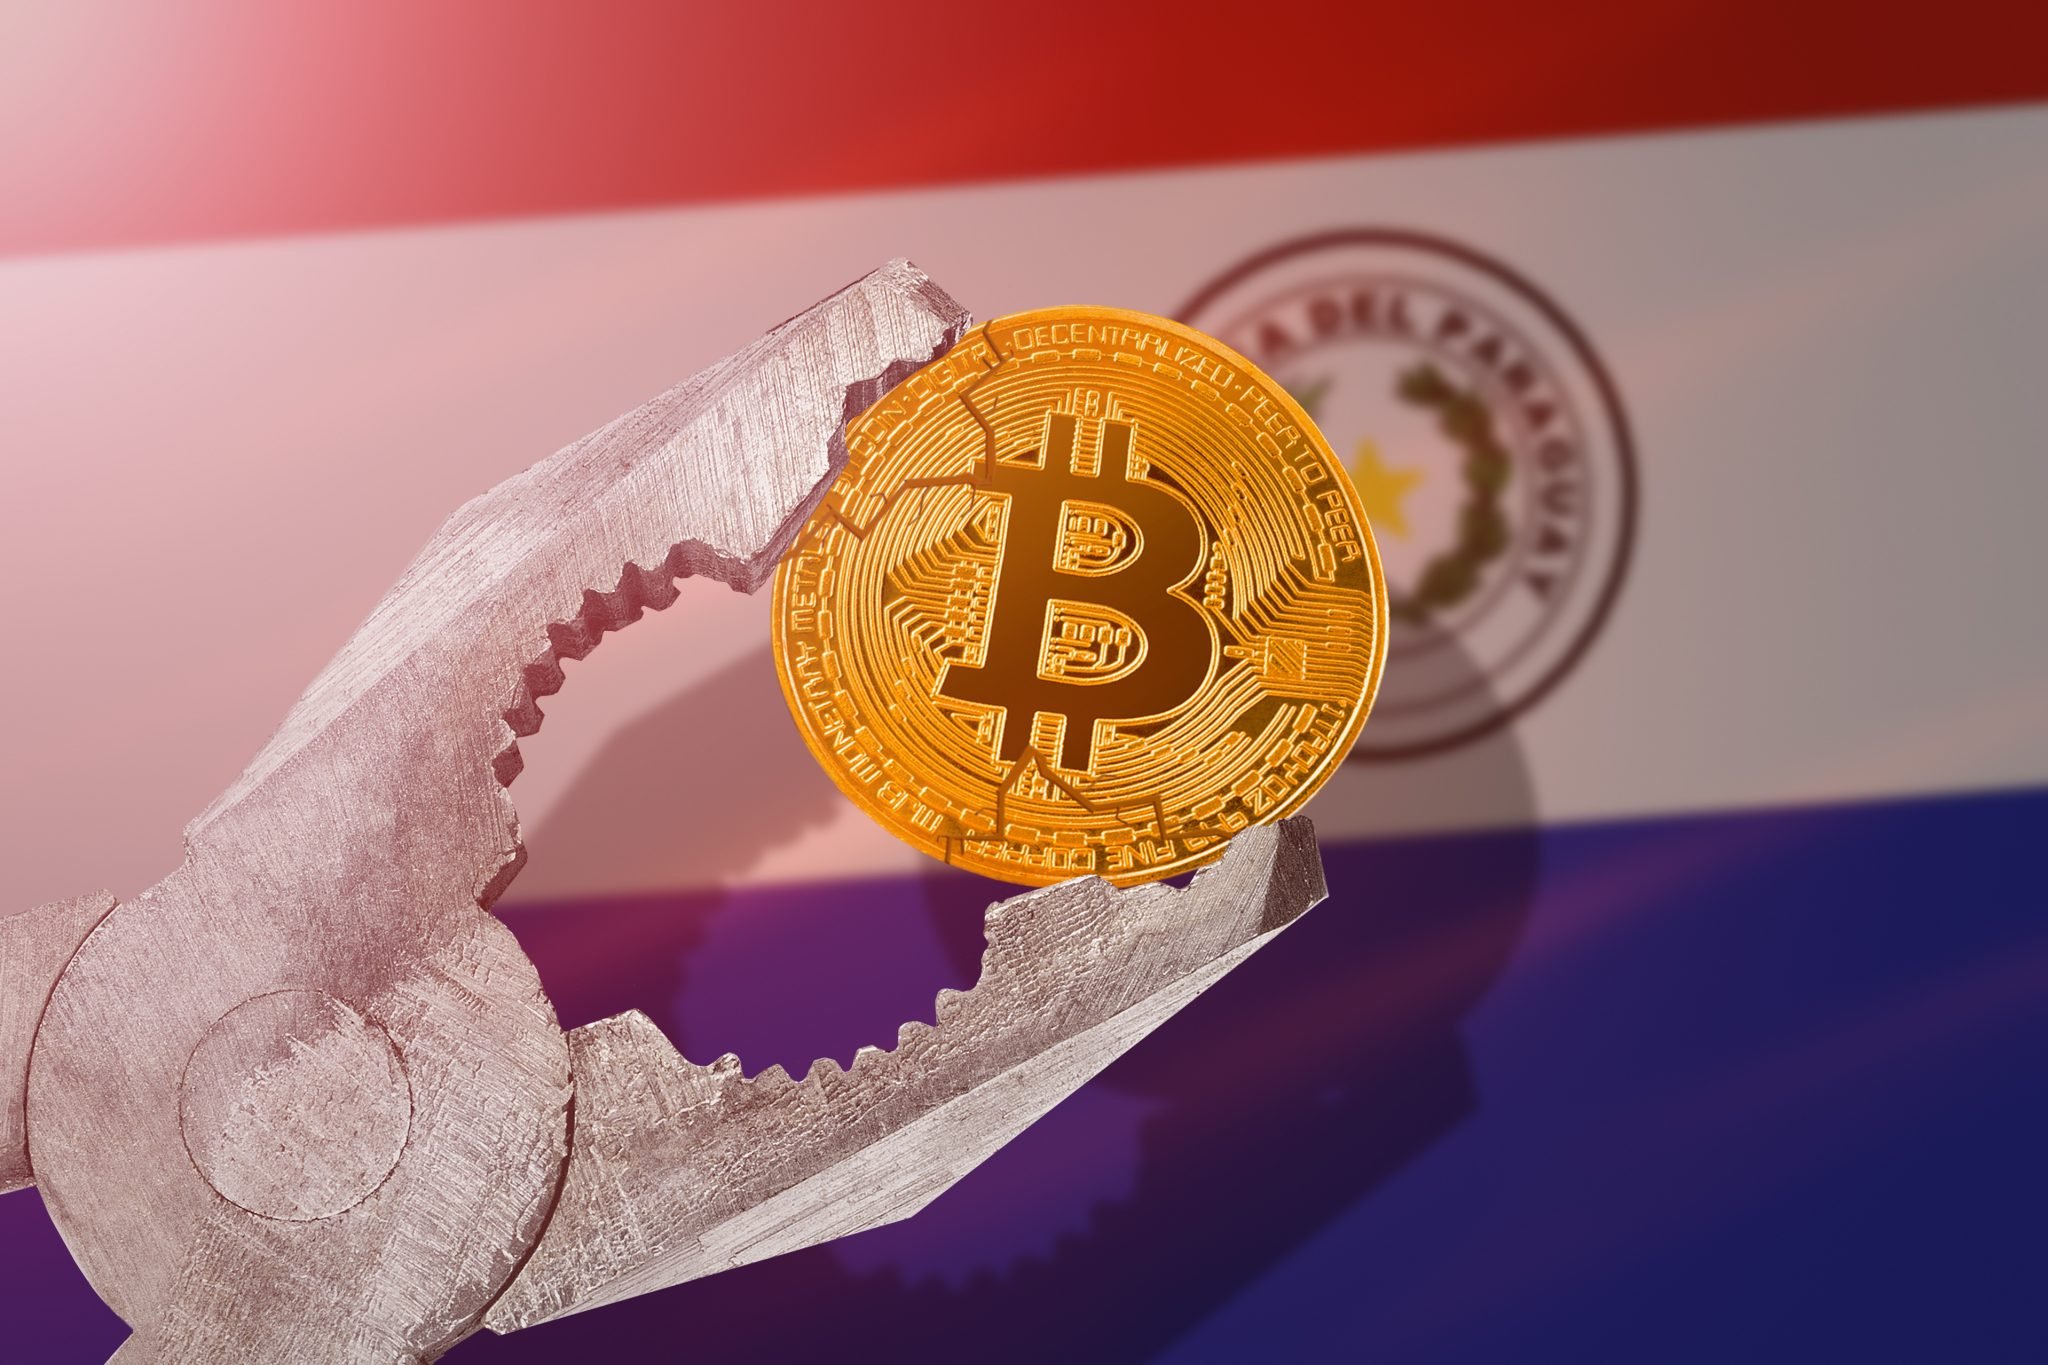 Bitcoin regulation in Paraguay; bitcoin btc coin being squeezed in vice on Paraguay flag background; limitation, prohibition, illegally, banned